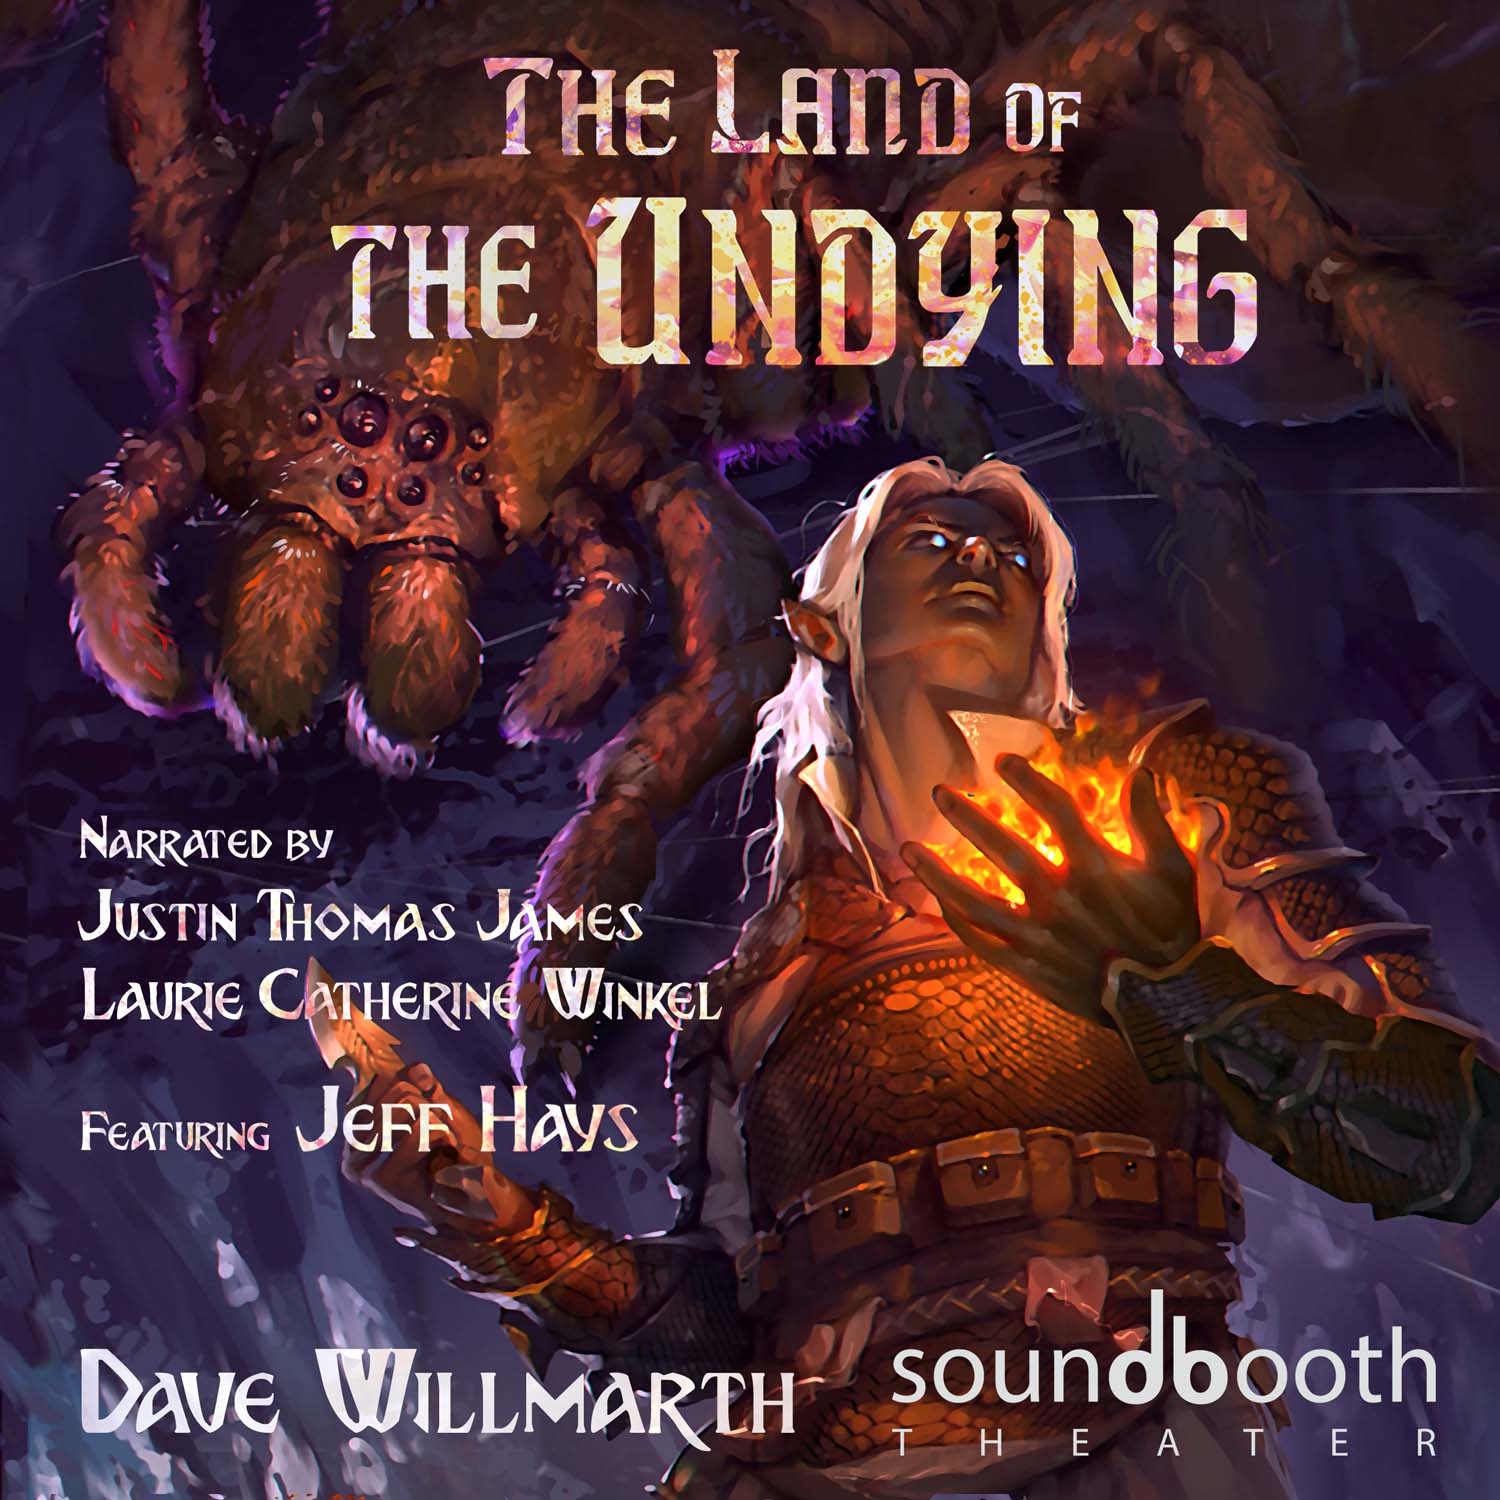 The Land of the Undying Lord by J.T. Wright